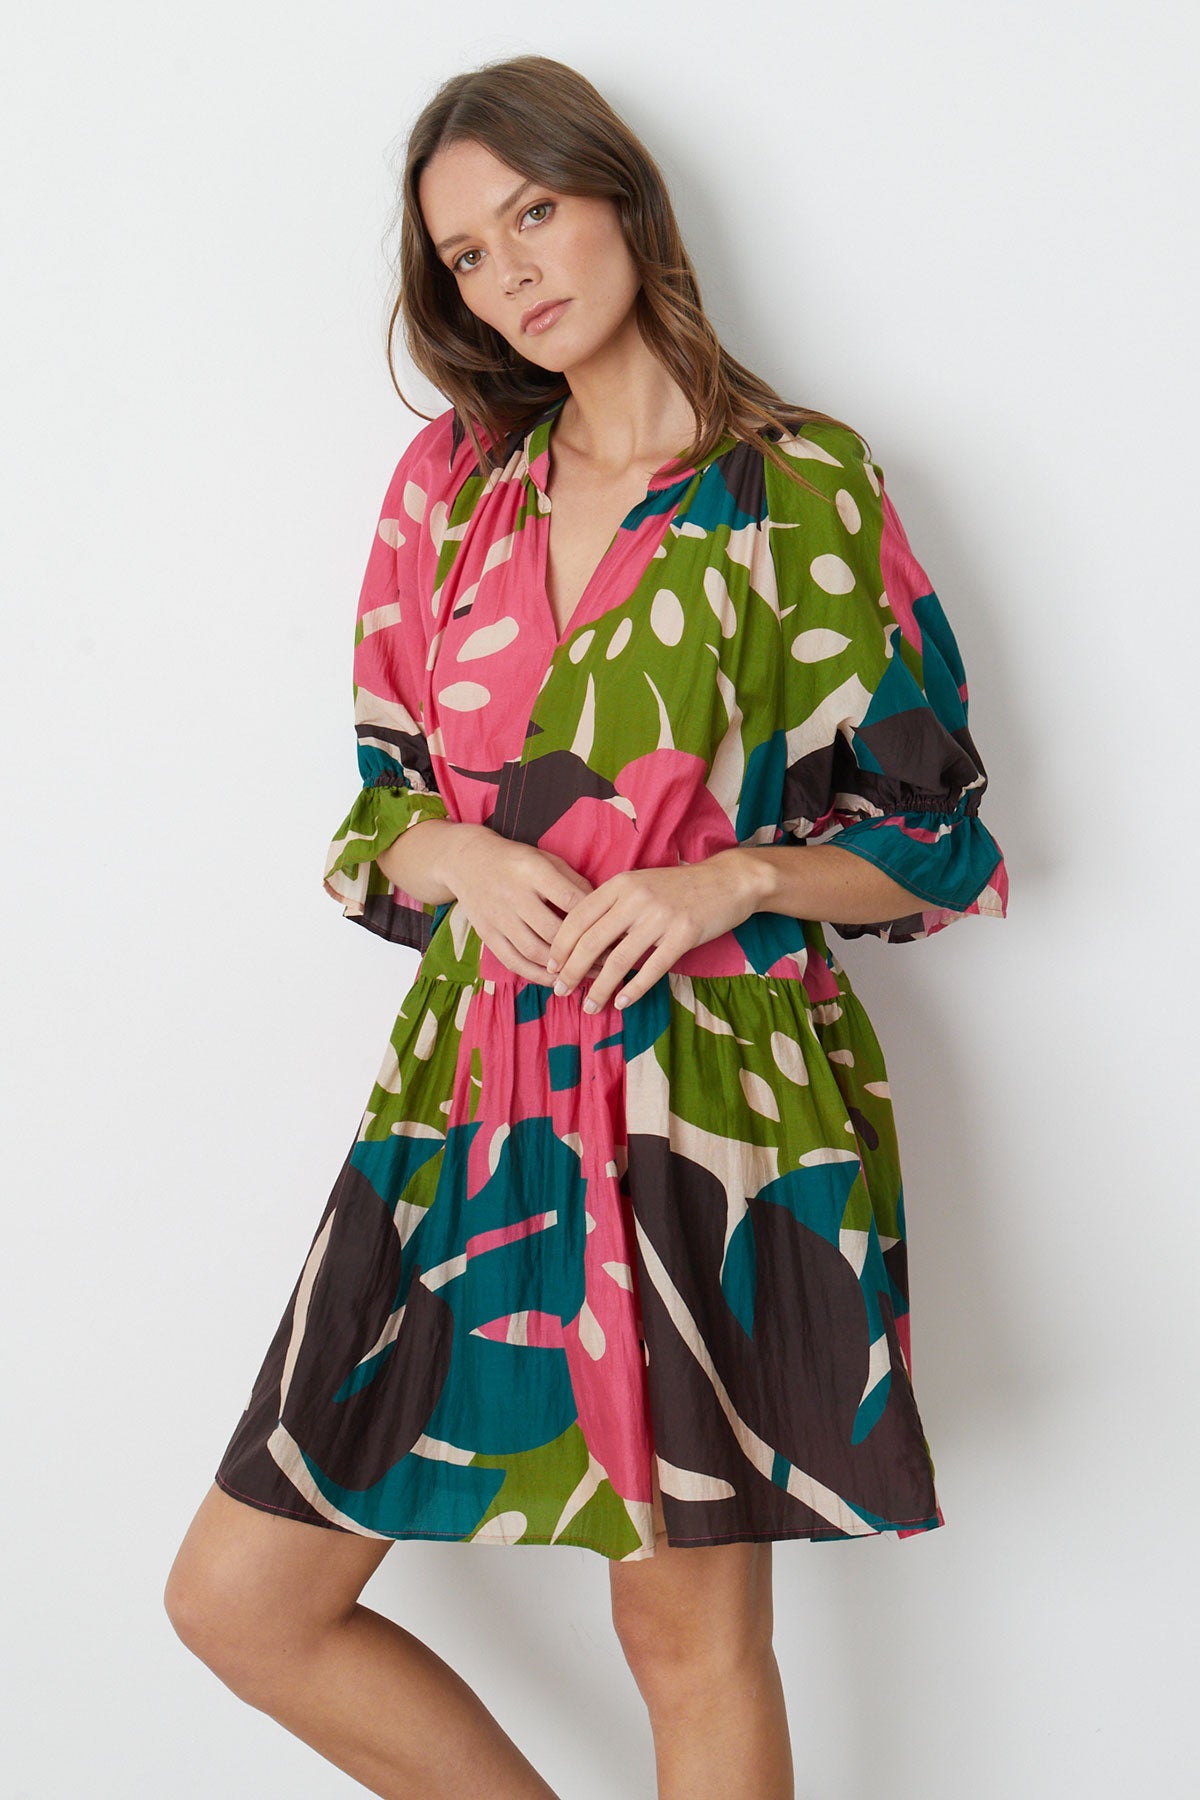   A model wearing a Velvet by Graham & Spencer TRACY PRINTED DRESS in bold colored Monstera print 